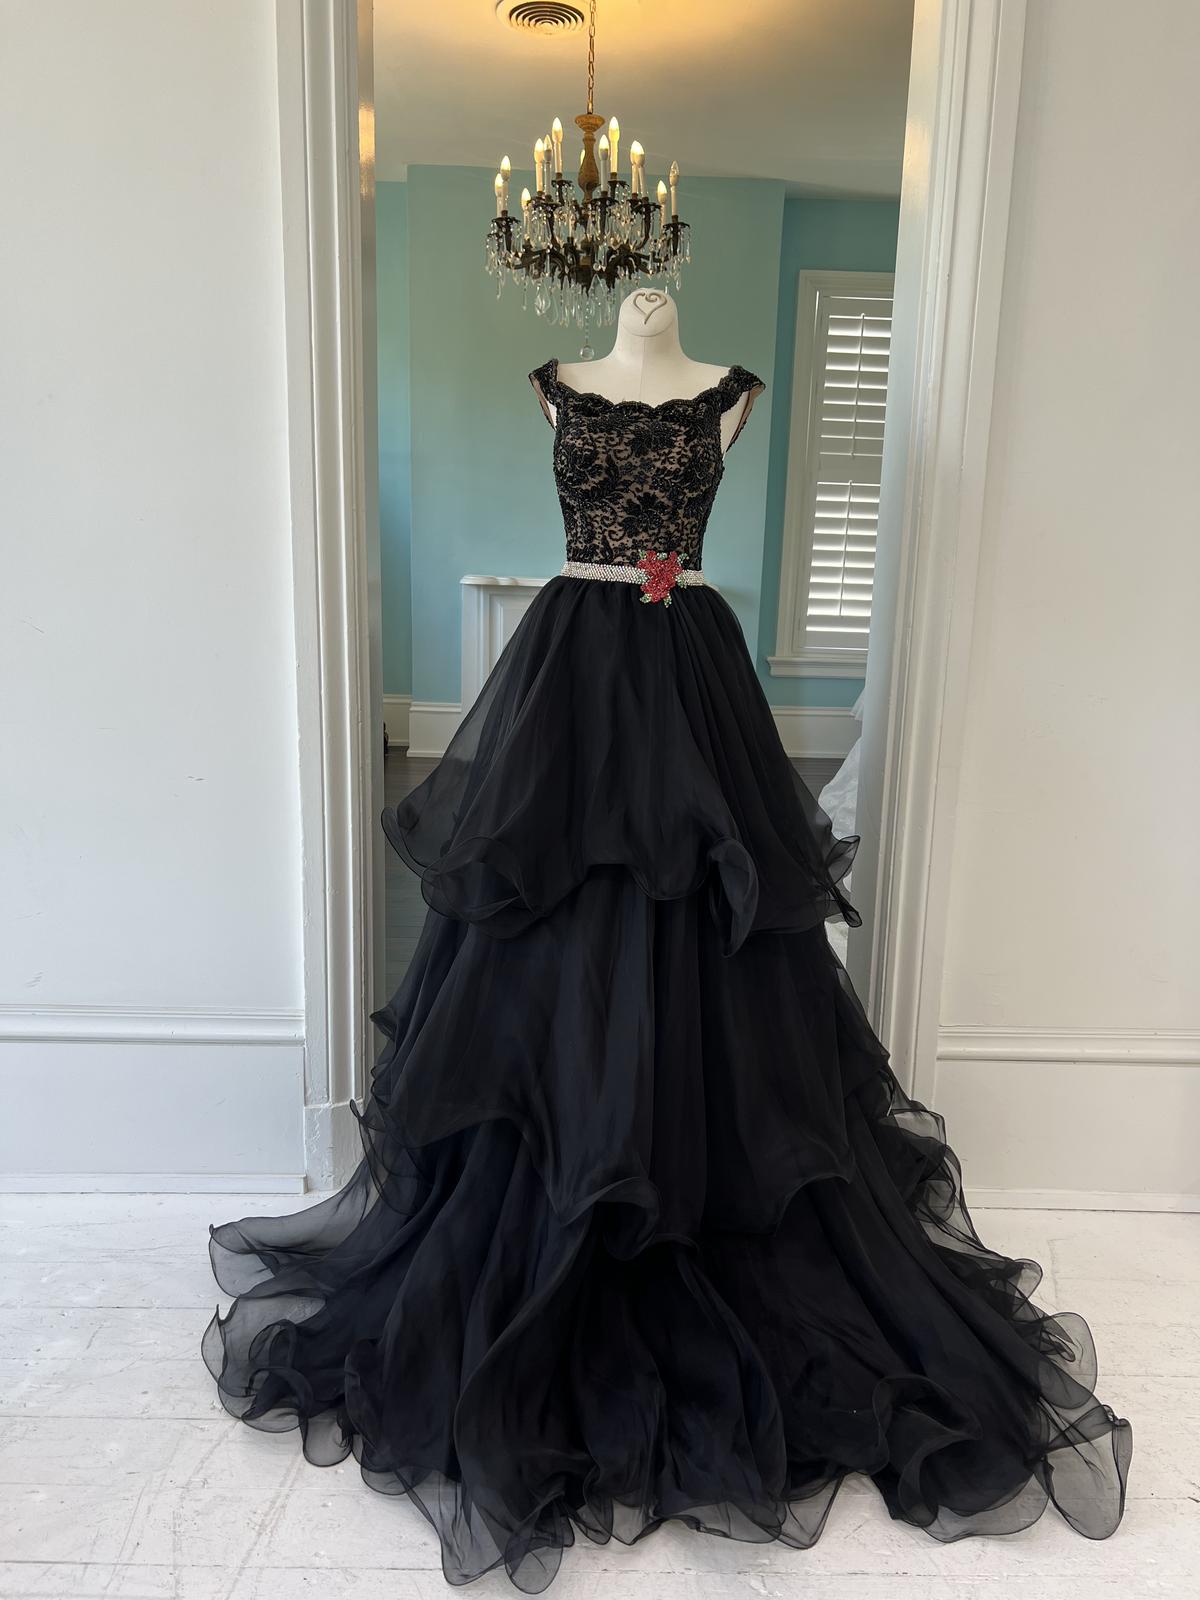 Sherri Hill Couture Black Ballgown Pageant Gown Black Rose